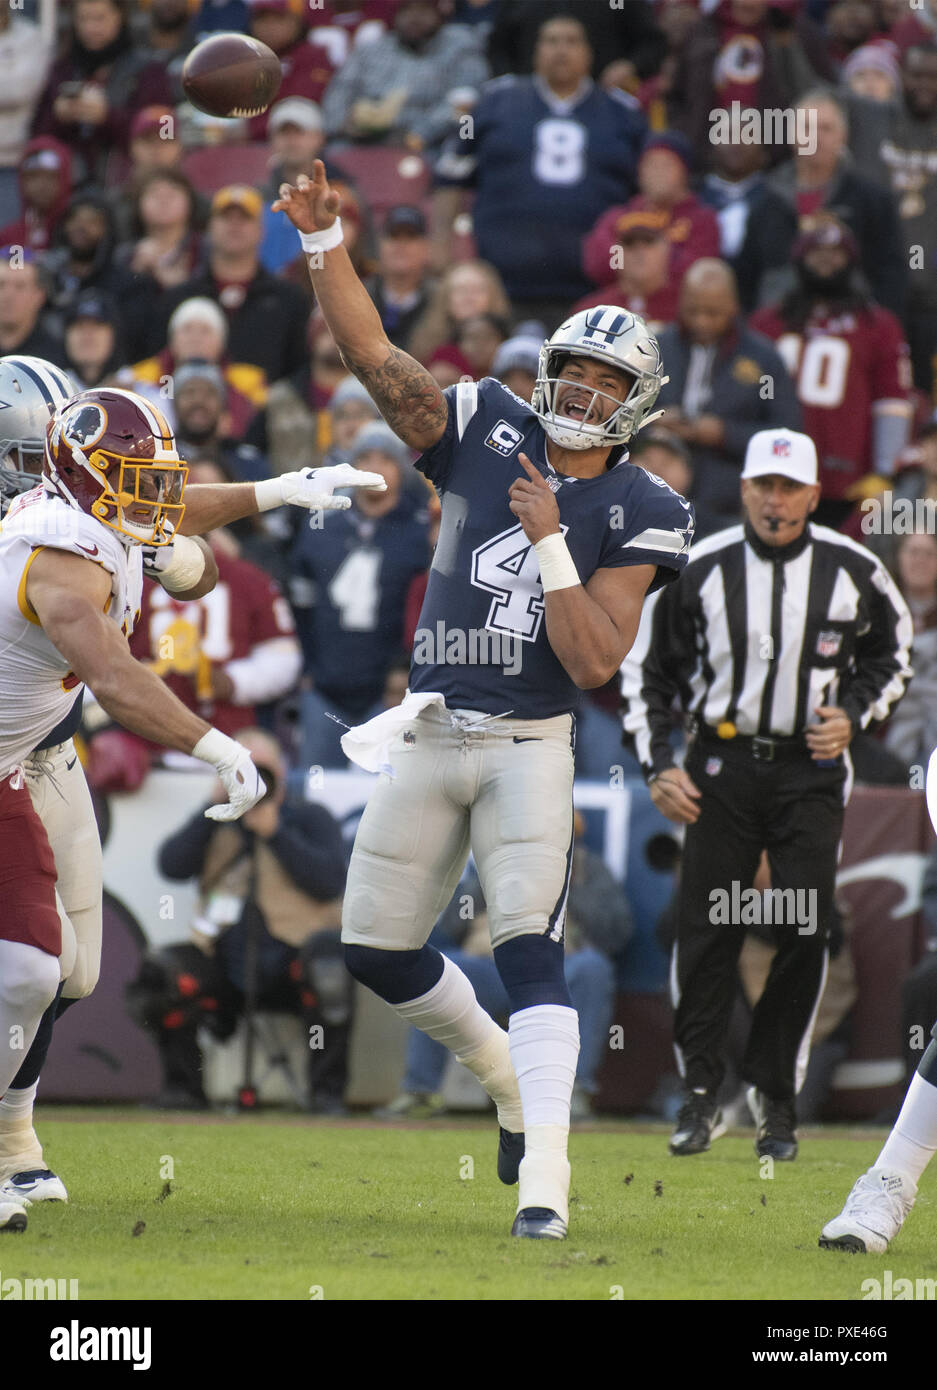 Landover, Maryland, USA. 21st Oct, 2018. Dallas Cowboys quarterback Dak Prescott (4) releases a pass early in the first quarter against the Washington Redskins at FedEx Field in Landover, Maryland on Sunday, October 21, 2018 Credit: Ron Sachs/CNP/ZUMA Wire/Alamy Live News Stock Photo